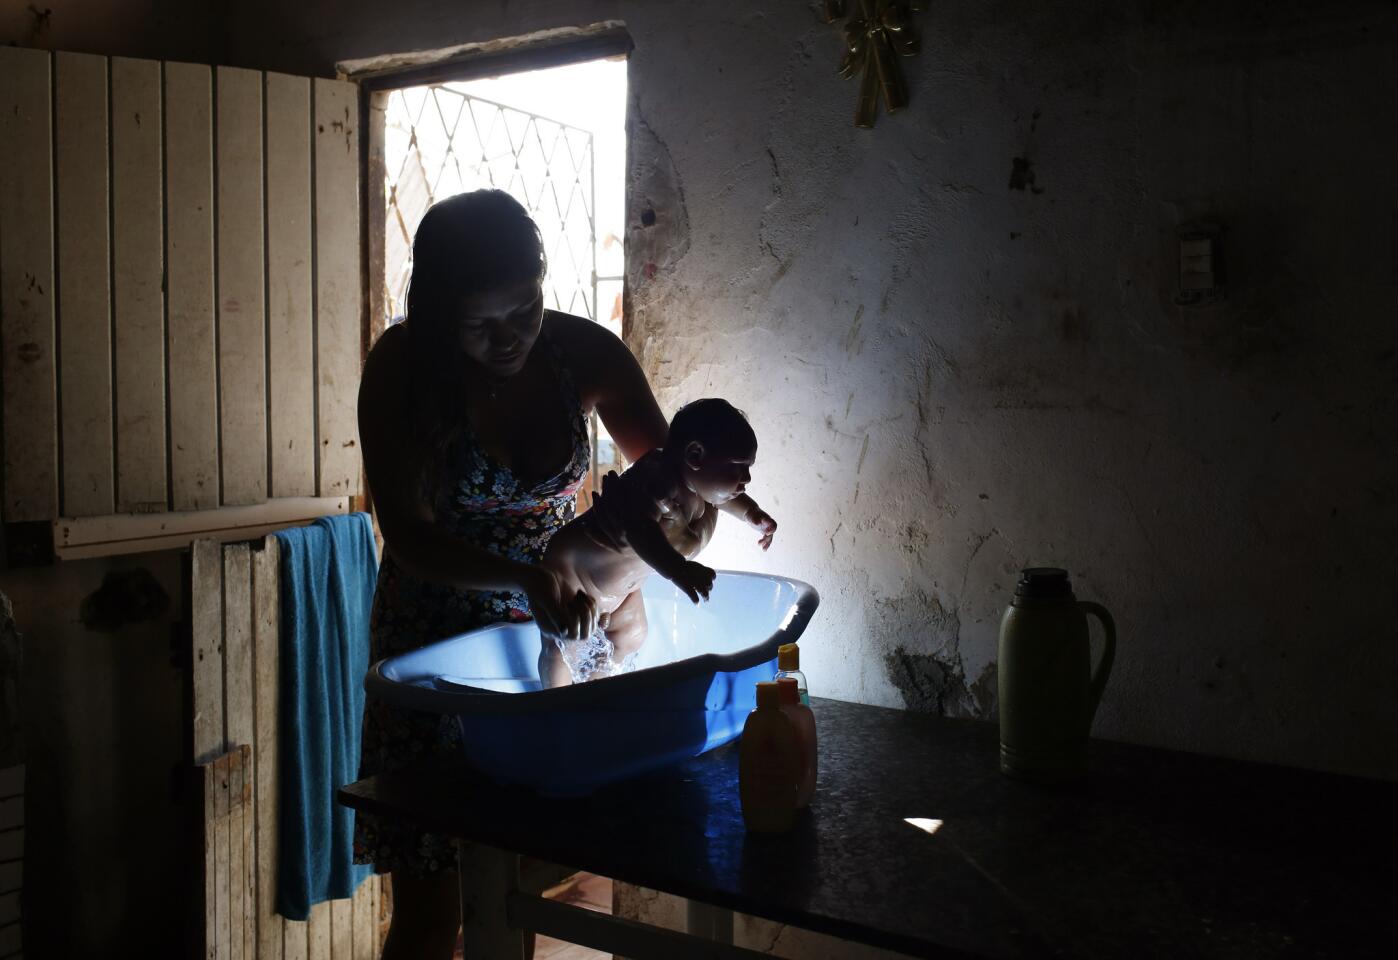 Ana Carolina da Silva Amorim bathes her cousin, Samuel, who was born with microcephaly. The neighborhood where they live in Campina Grande is infested with mosquitoes.